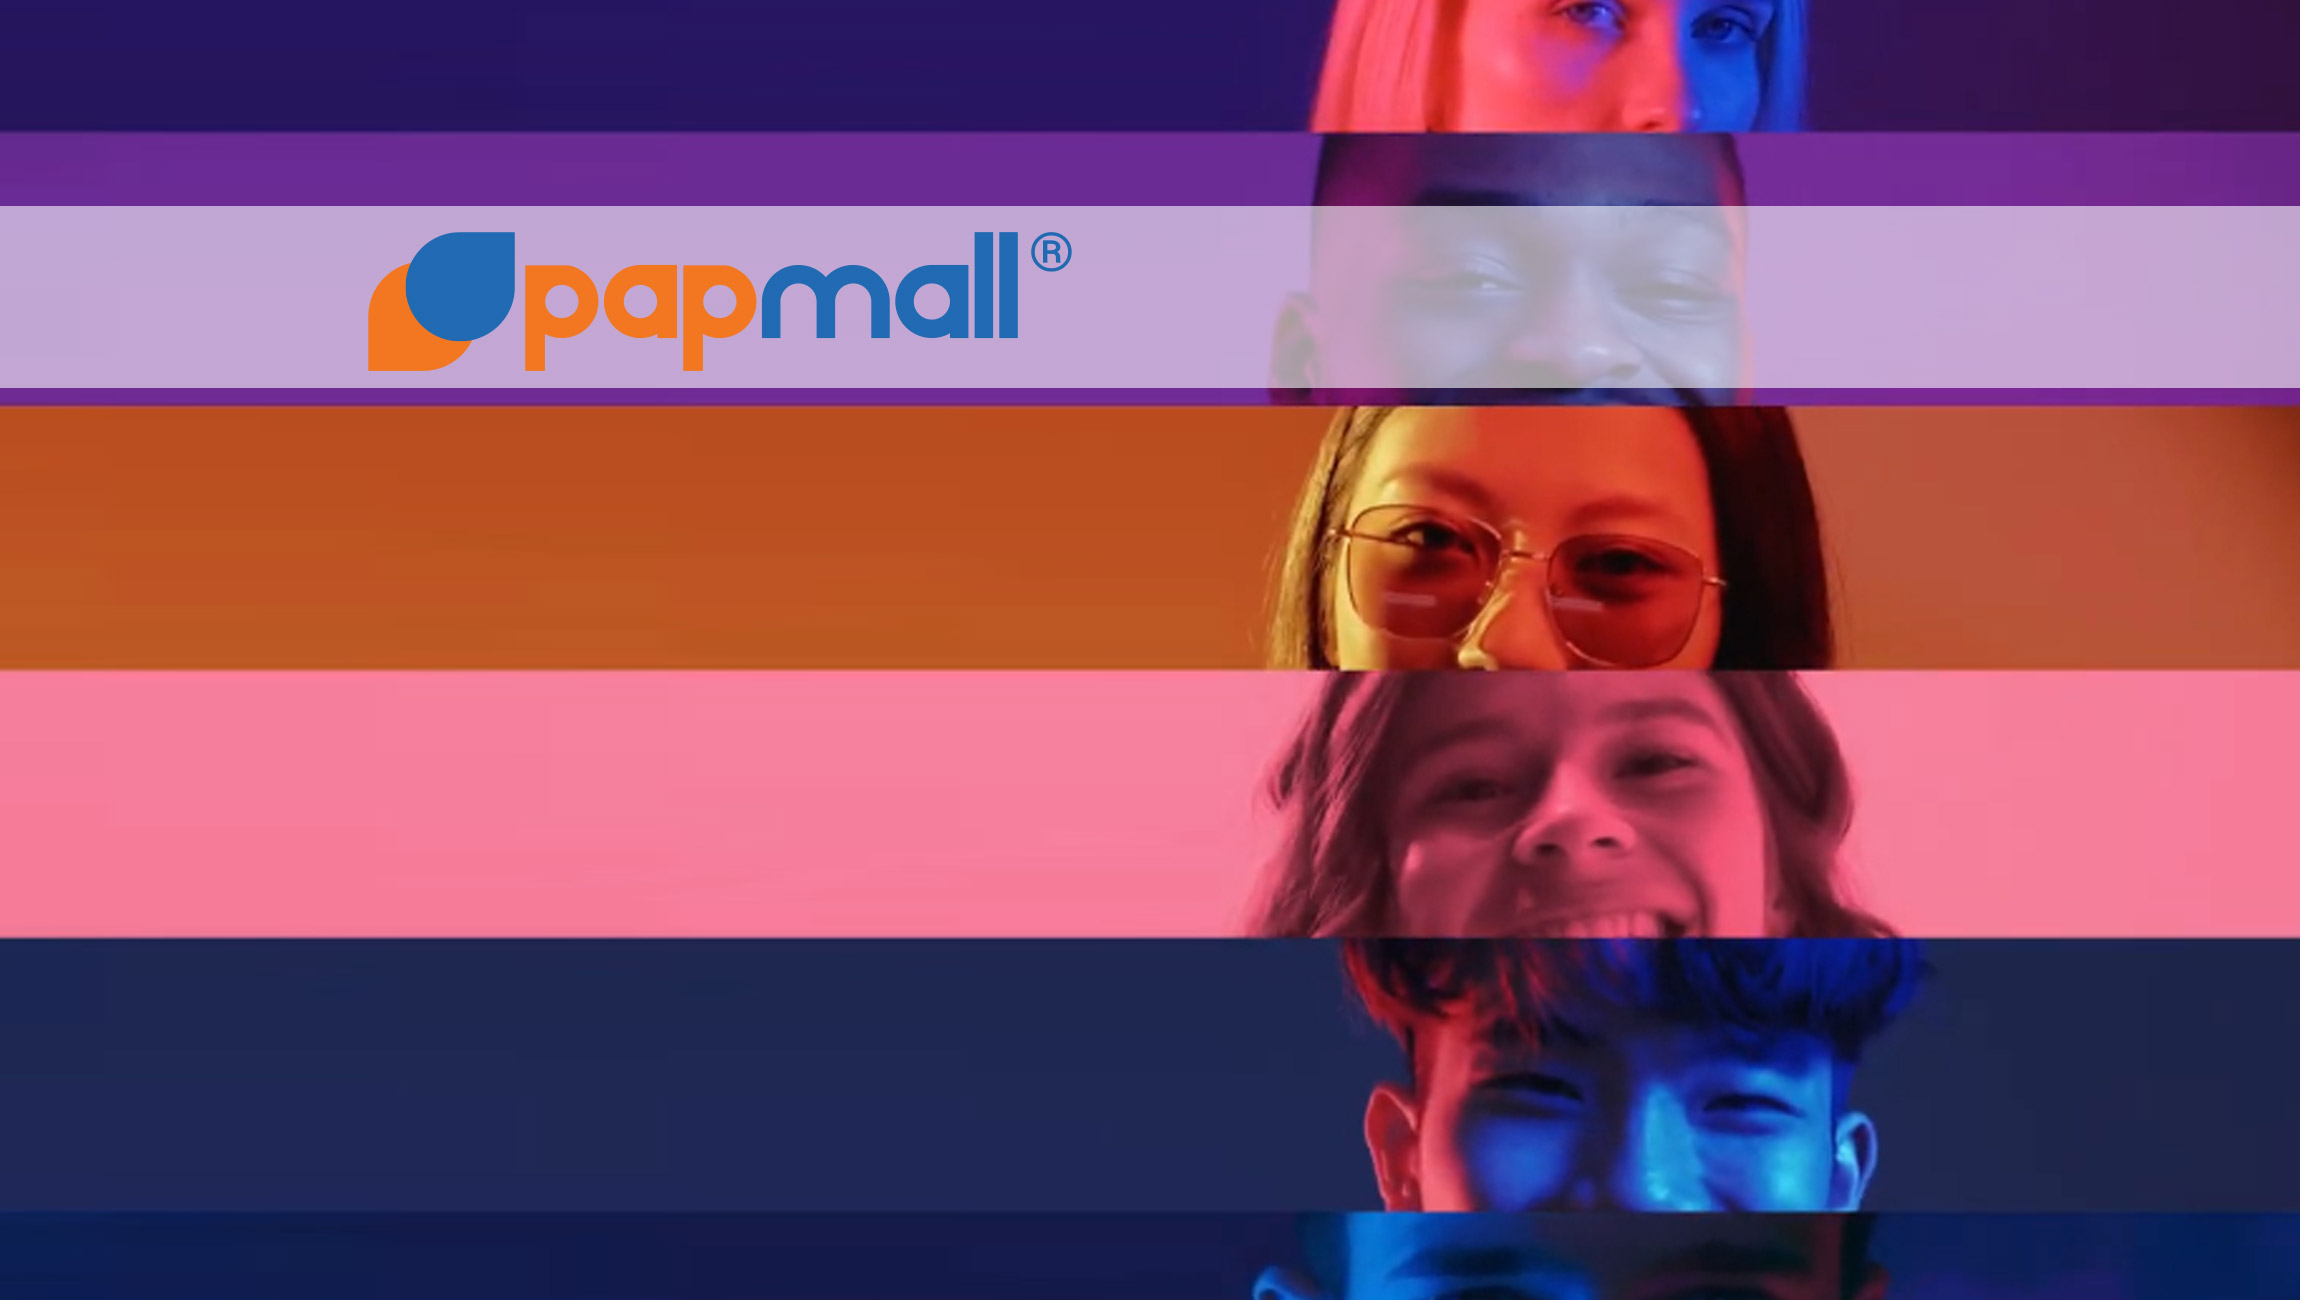 The Latest Launch of papmall - A New eCommerce Marketplace Platform for International Sellers